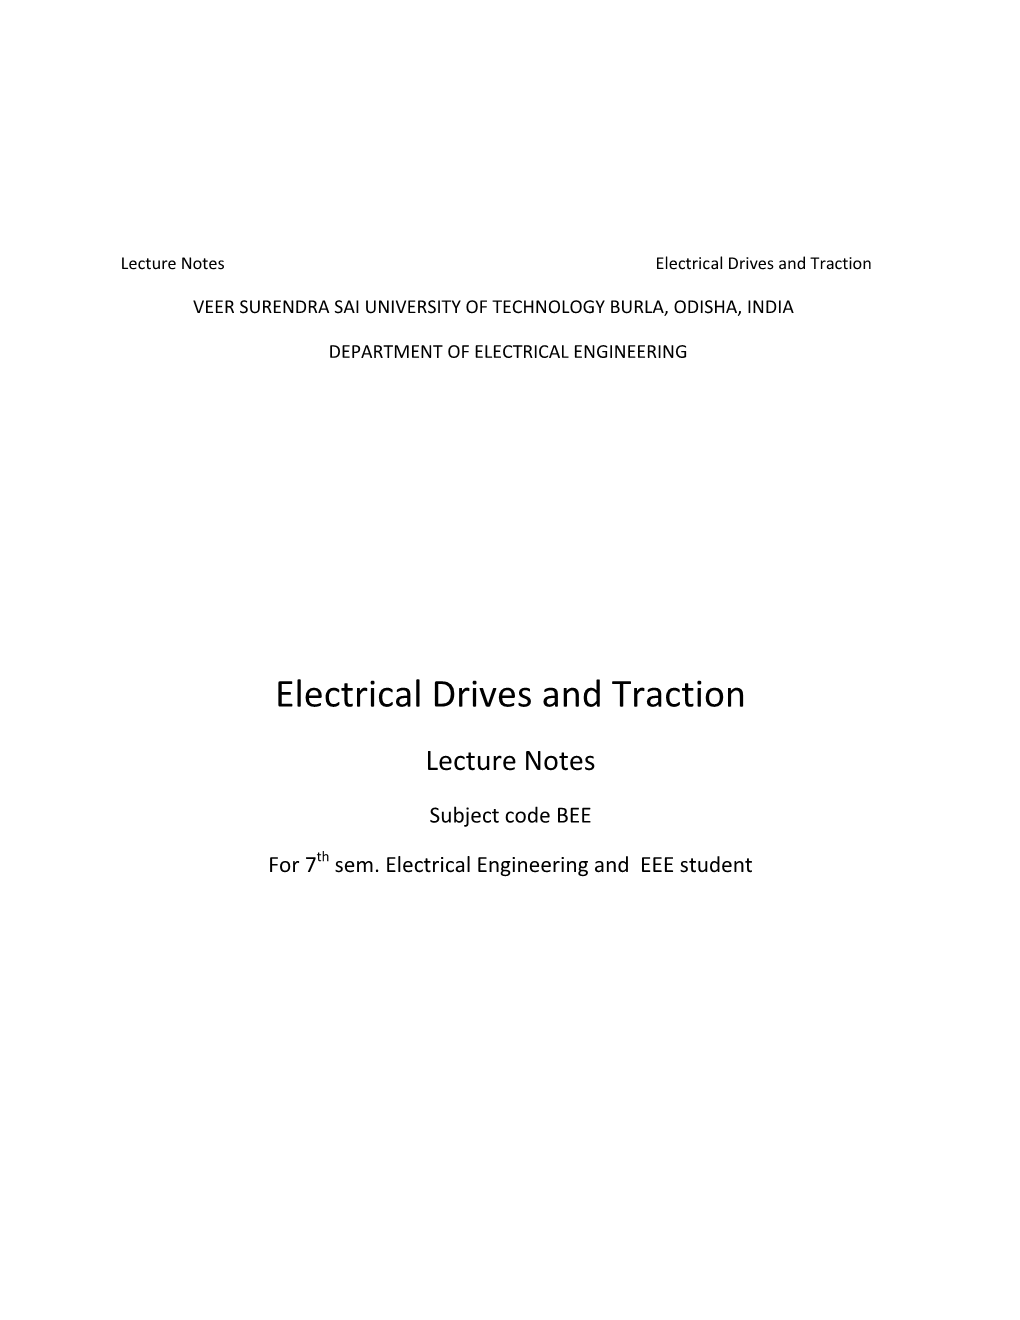 Electrical Drives and Traction